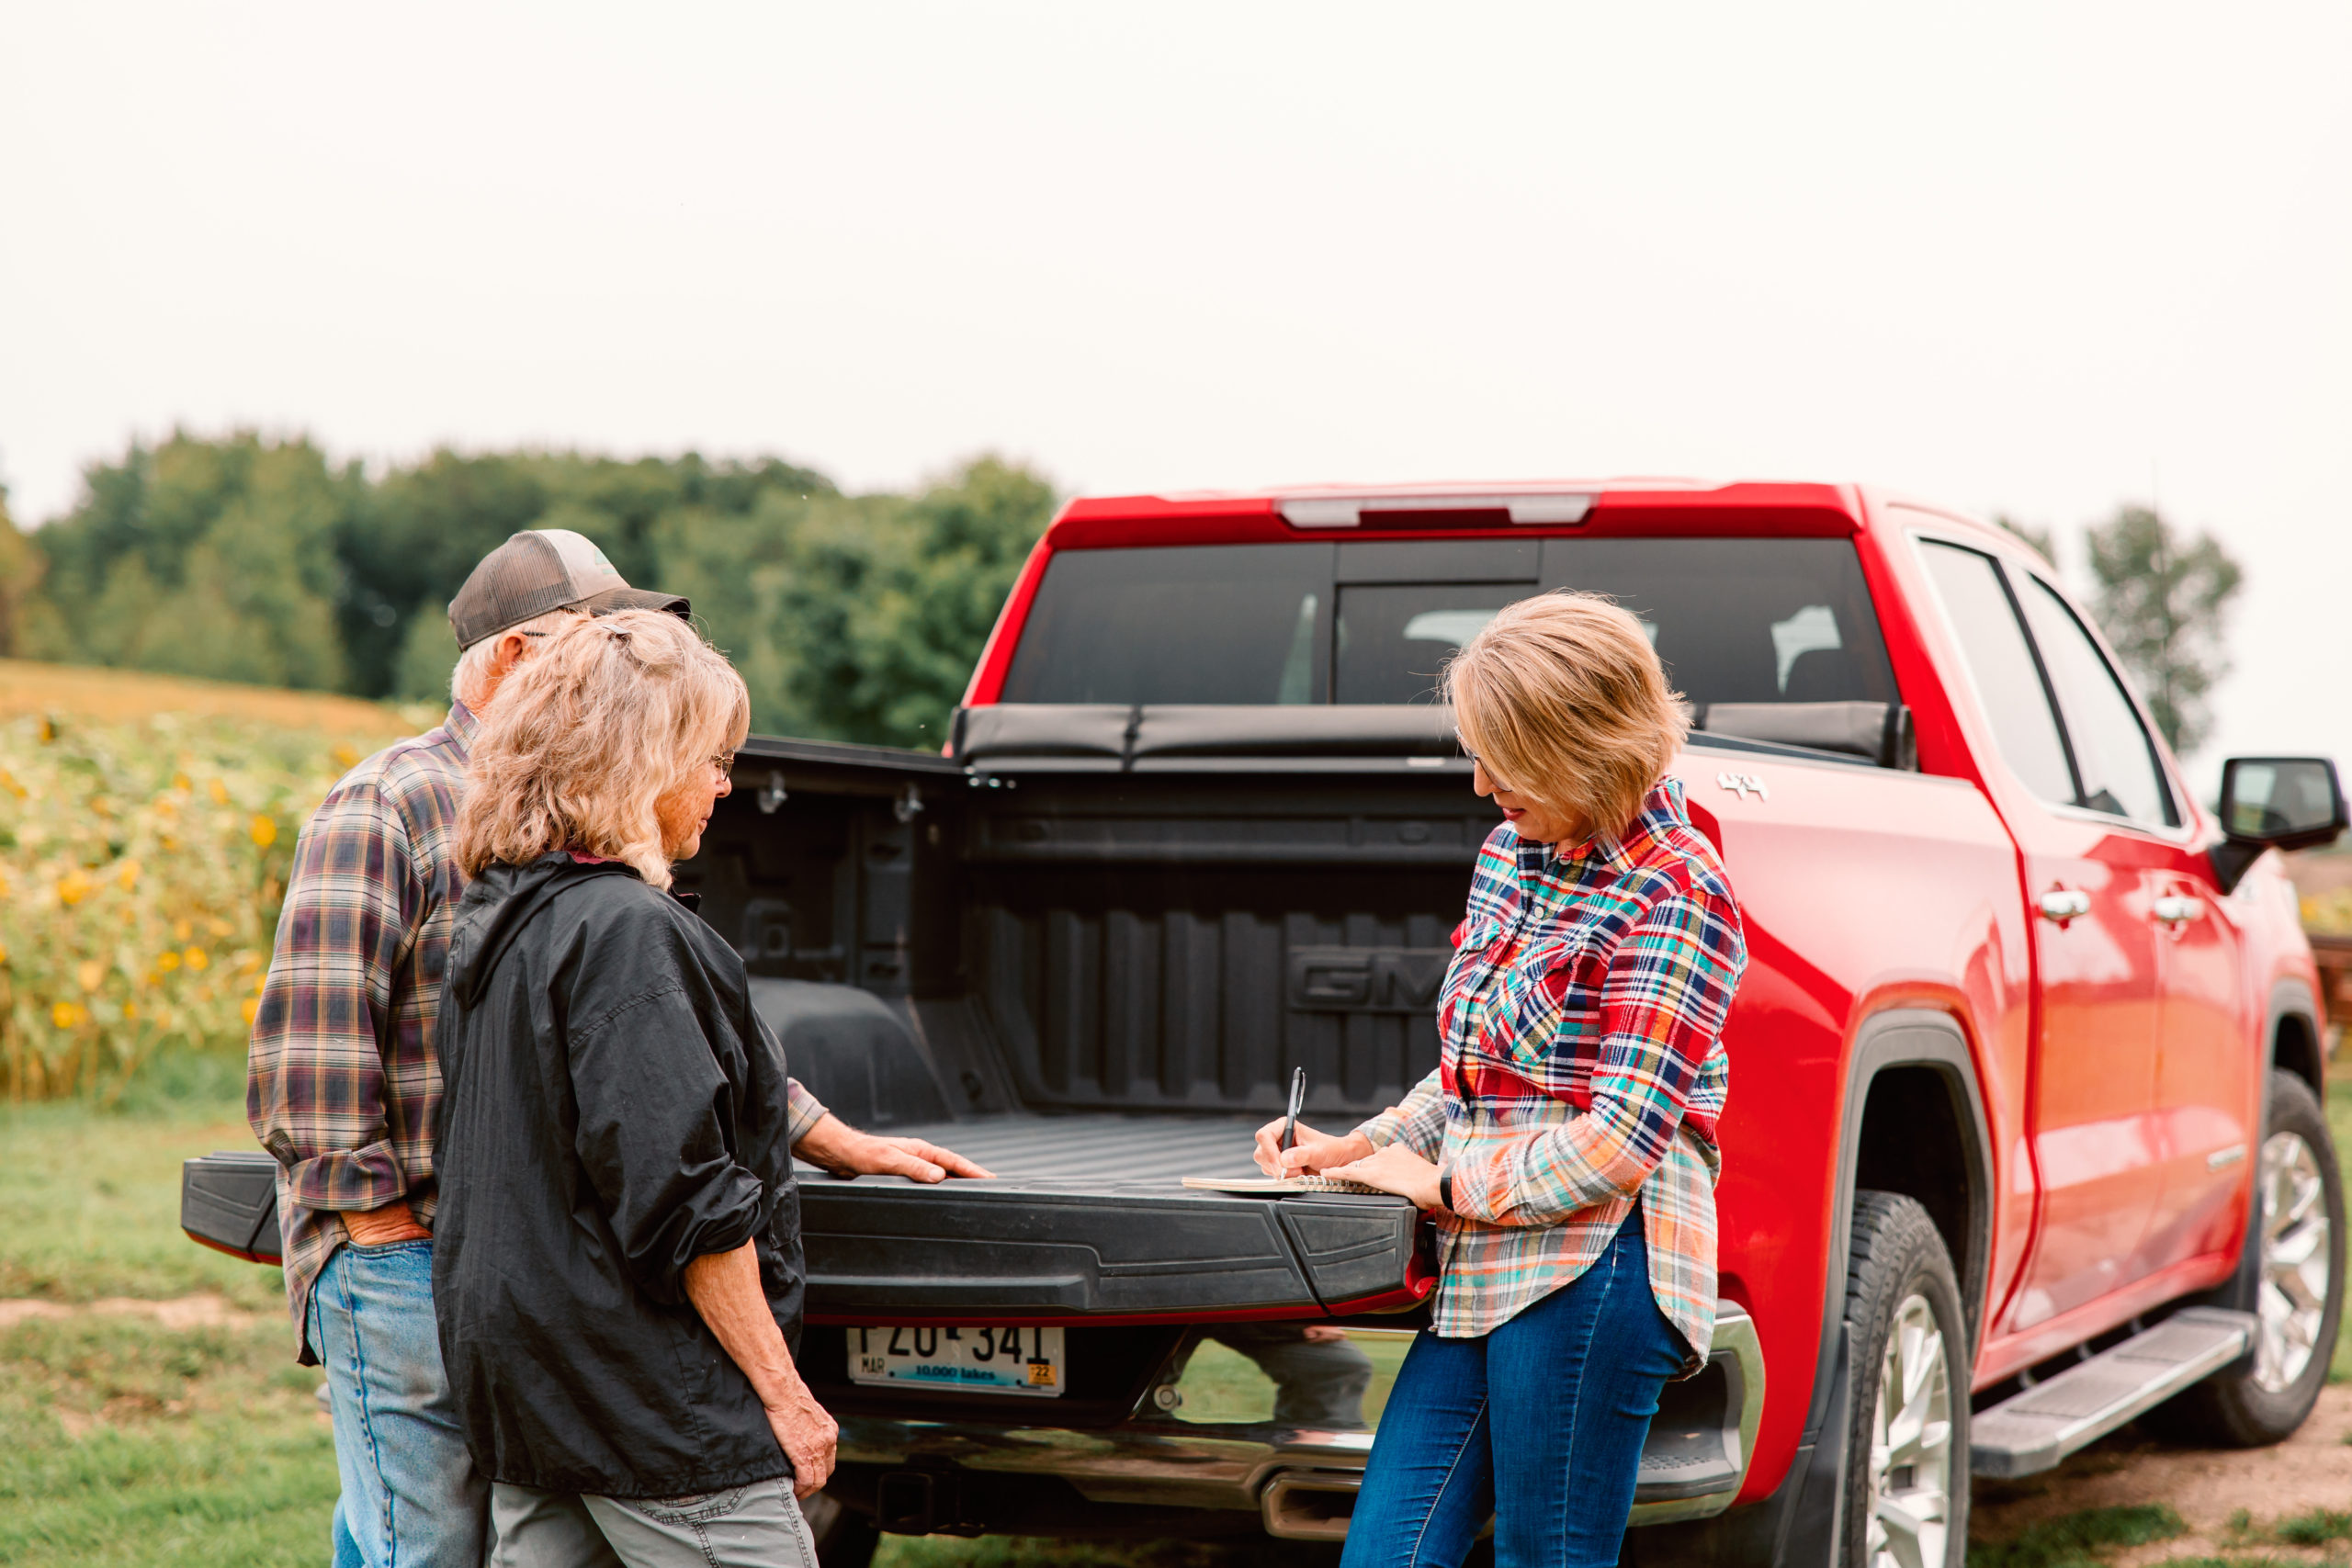 A picture of a woman signing a document on the back of a truck bed. The truck is red with Minnesota license plates. The woman signing the paper has blonde hair and is wearing a plaid shirt. The other woman has blonde hair and is wearing a black pull-over. The man is wearing a hat and a plaid shirt. The three people are near a farm with trees and a field in the background.